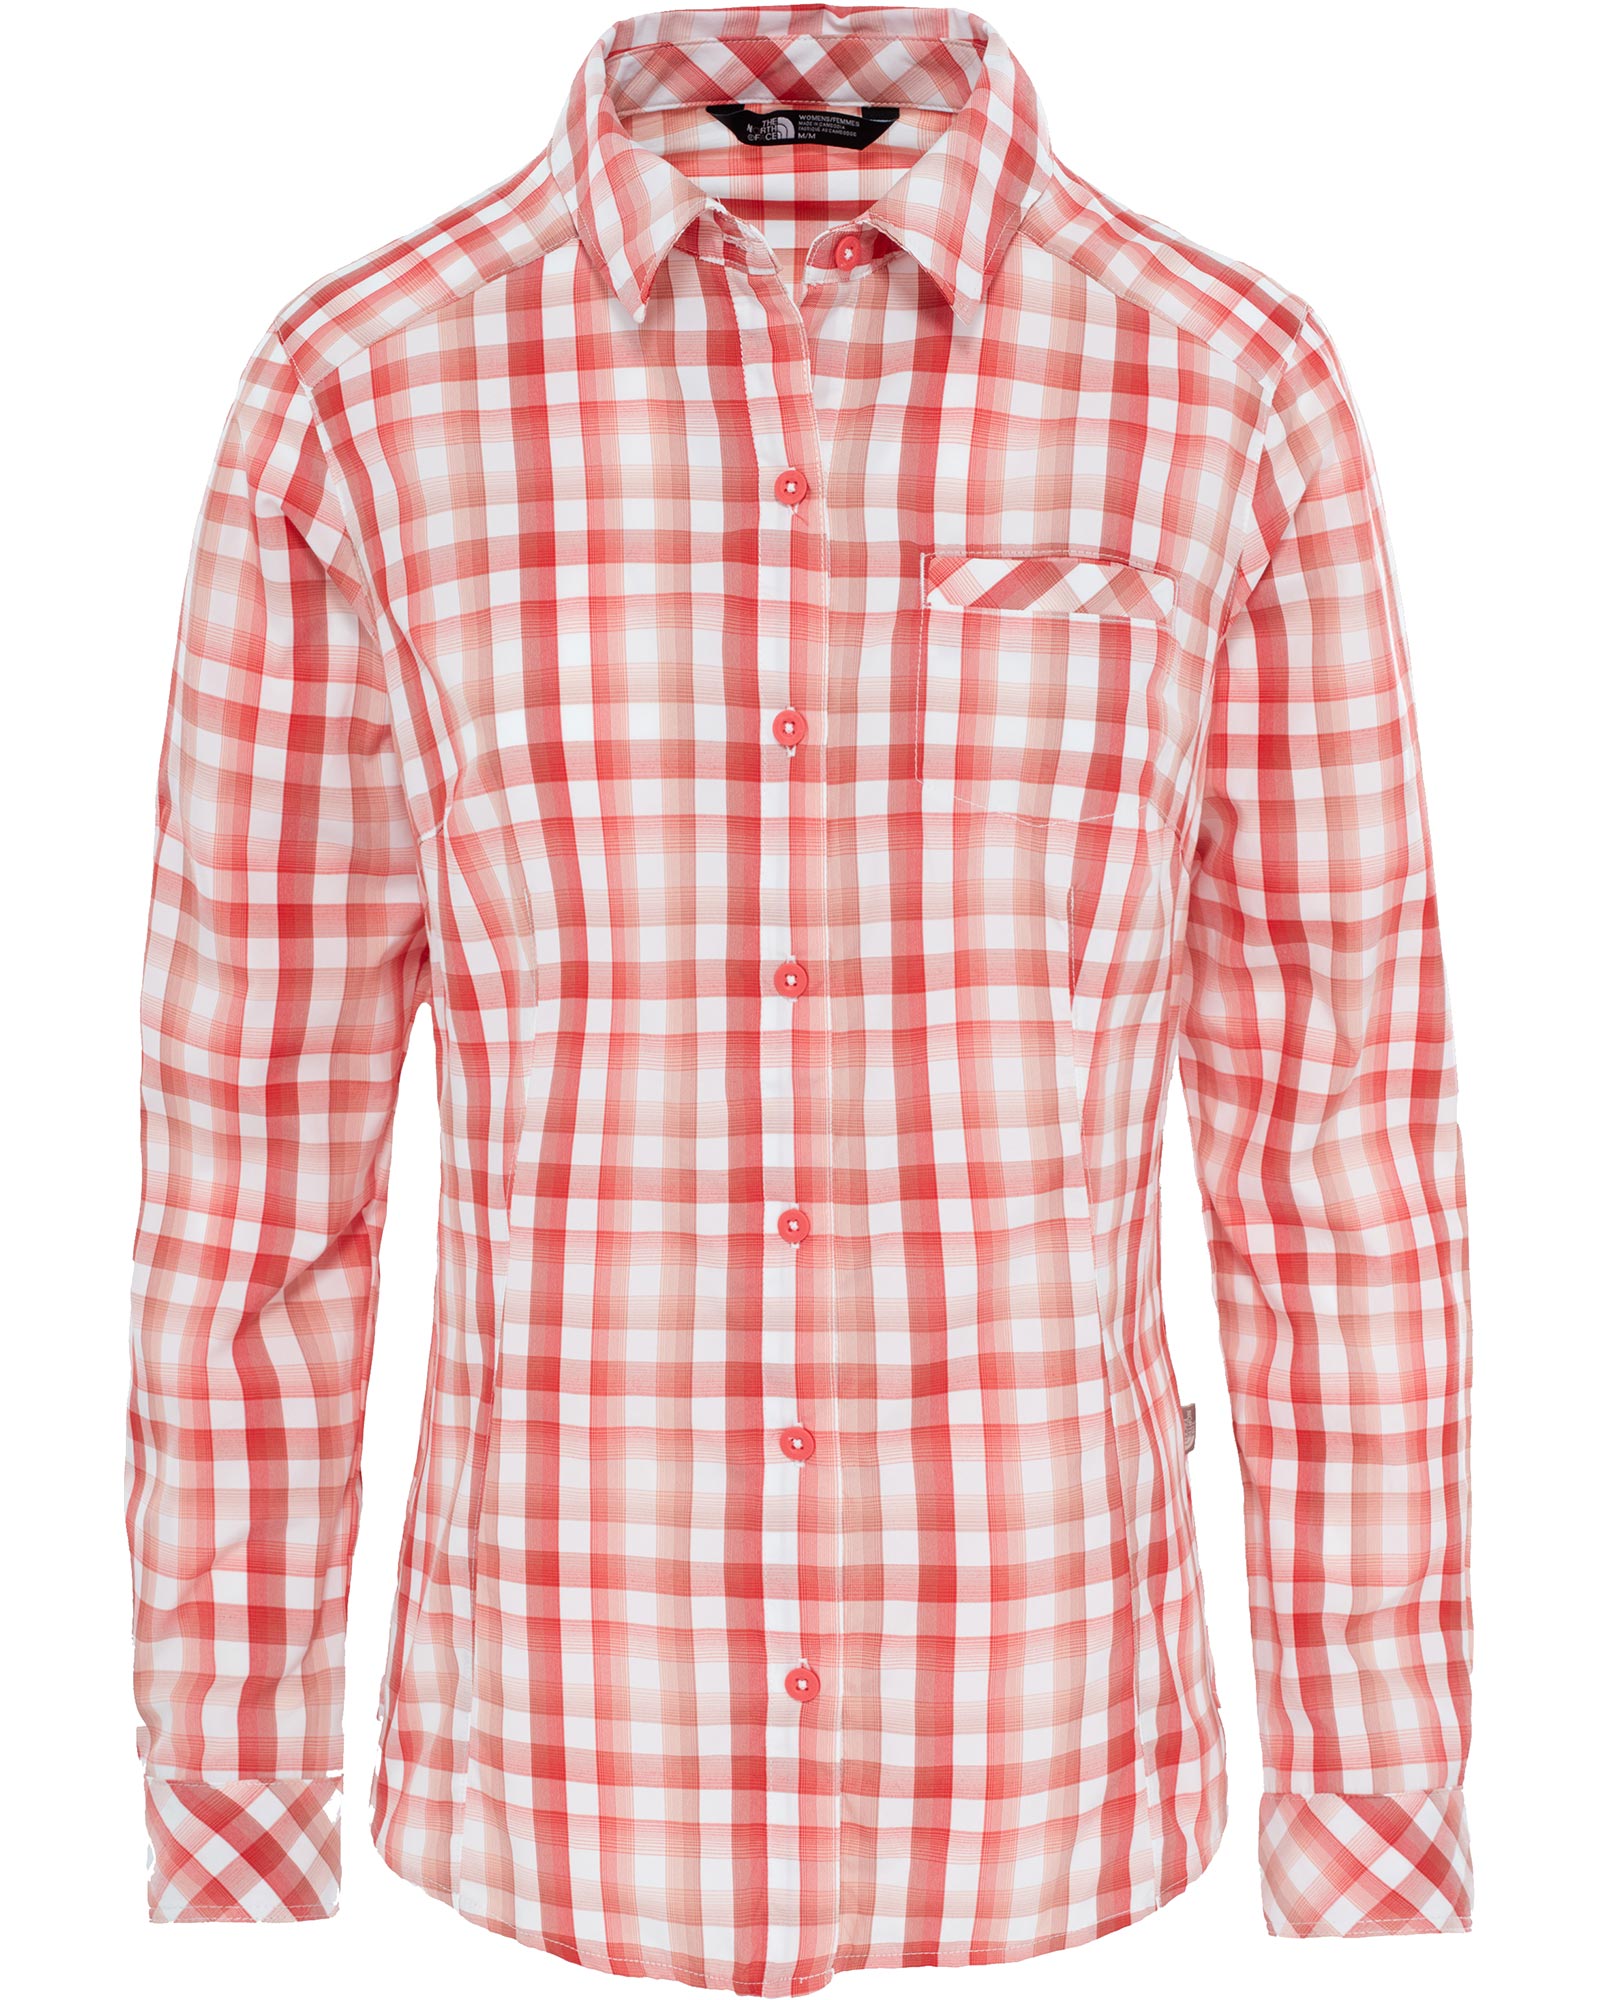 The North Face Zion Women’s Long Sleeve Shirt - Cayenne Red Plaid M